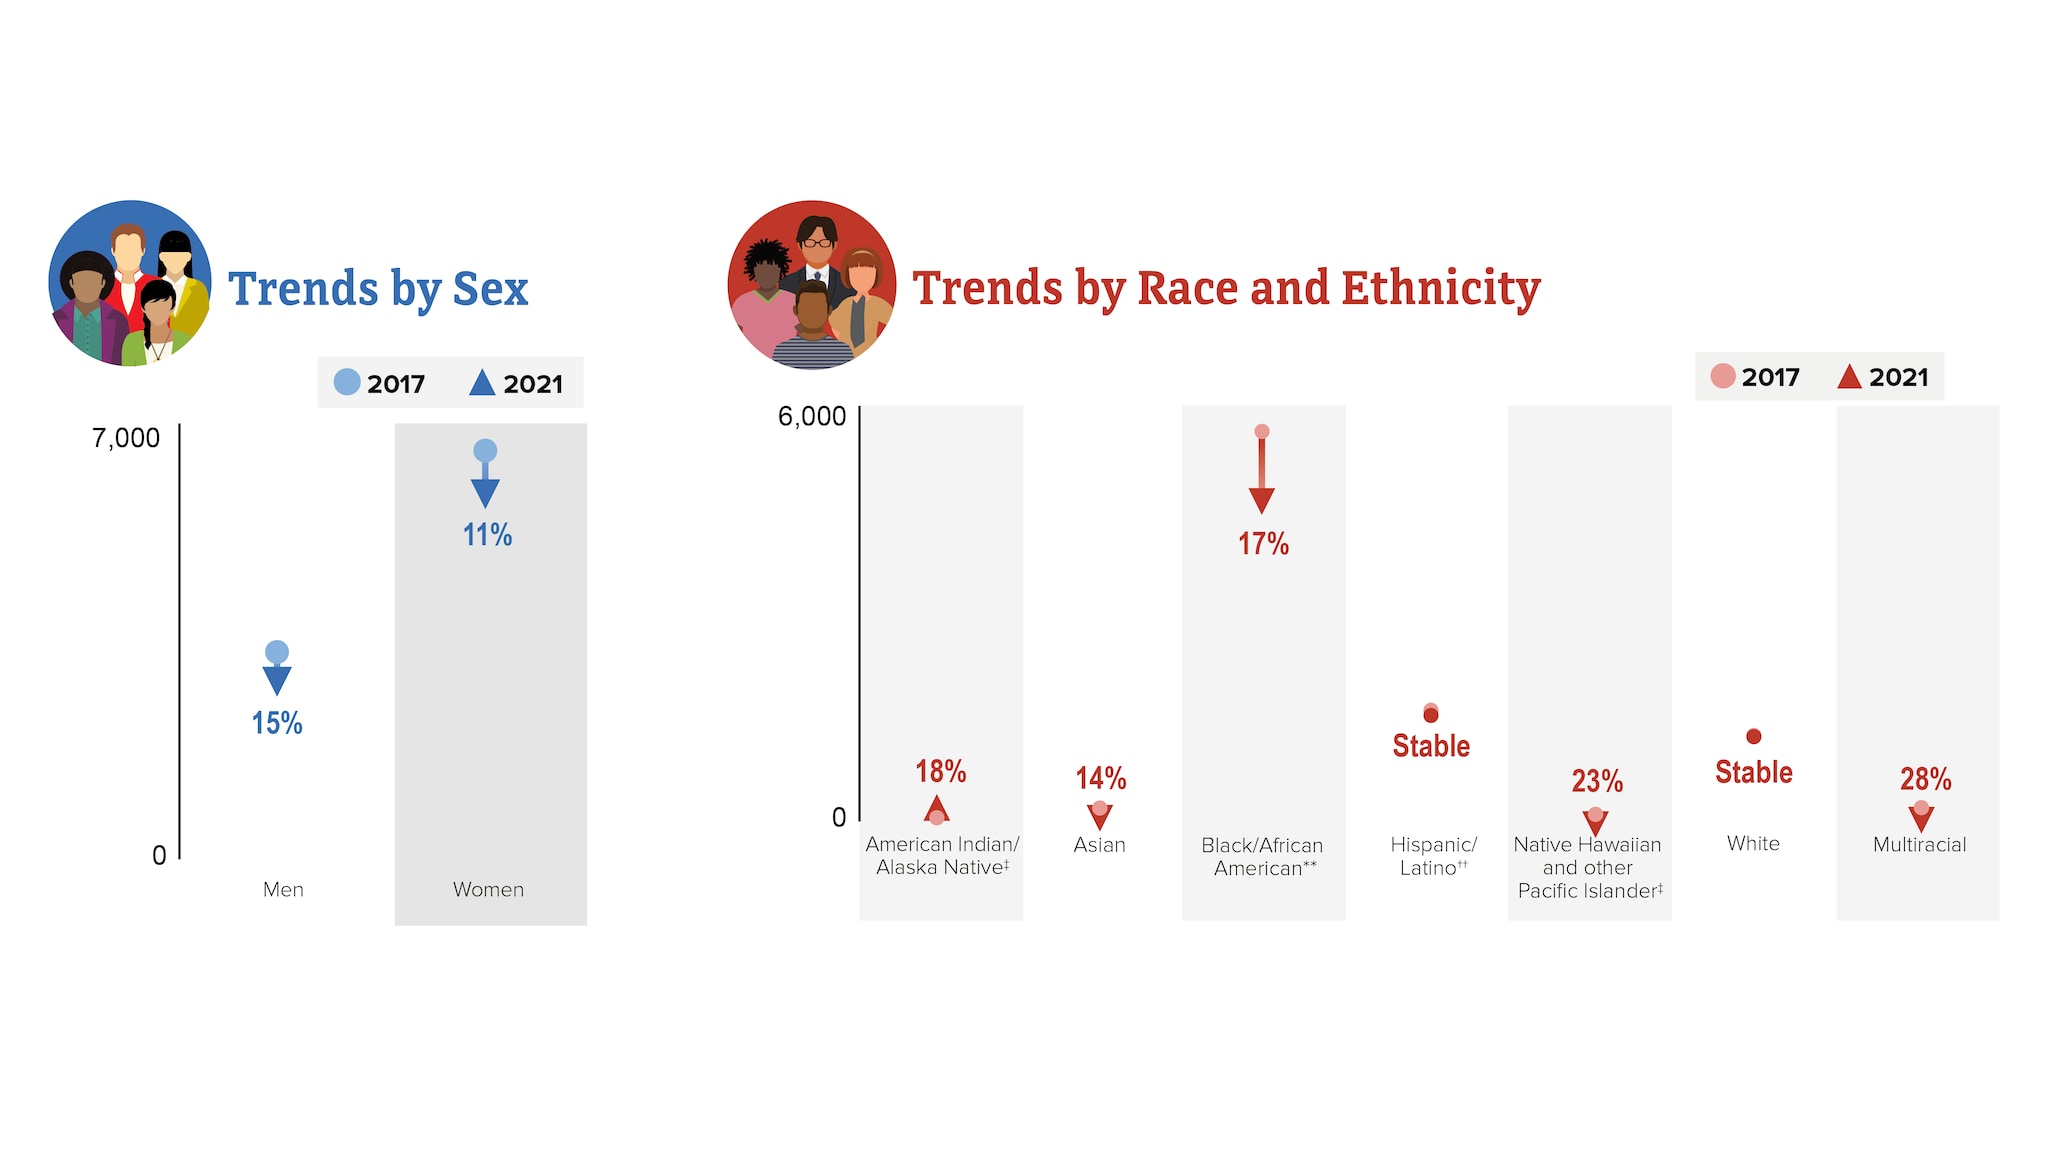 From 2017 to 2021, HIV diagnoses among men who reported heterosexual contact in the US and dependent areas decreased slightly more than women who reported heterosexual contact. Trends for HIV diagnoses also varied by race and ethnicity, with multiracial people decreasing the most, followed by Native Hawaiian and other Pacific Islander, Black/African American, and Asian people, respectively. Diagnoses for Hispanic/Latino people were stable, but increased for American Indian/Alaska Native people during that period. Note, changes in subpopulations with fewer HIV diagnoses can lead to a large percentage increase or decrease.